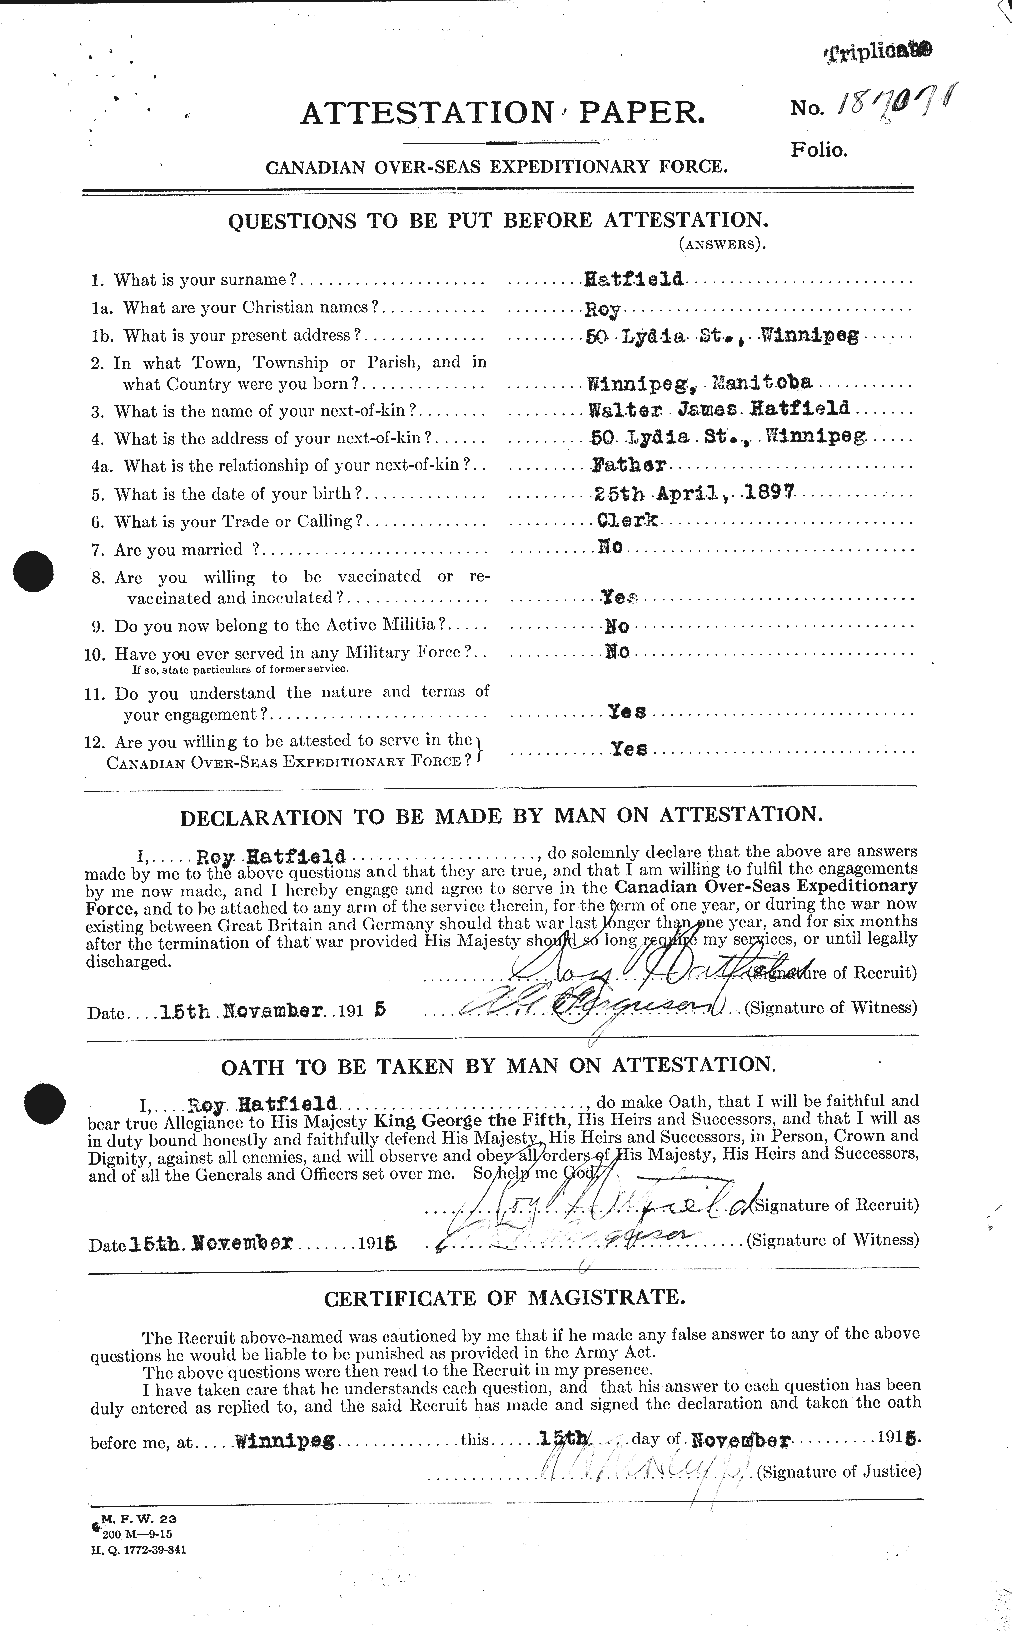 Personnel Records of the First World War - CEF 381158a